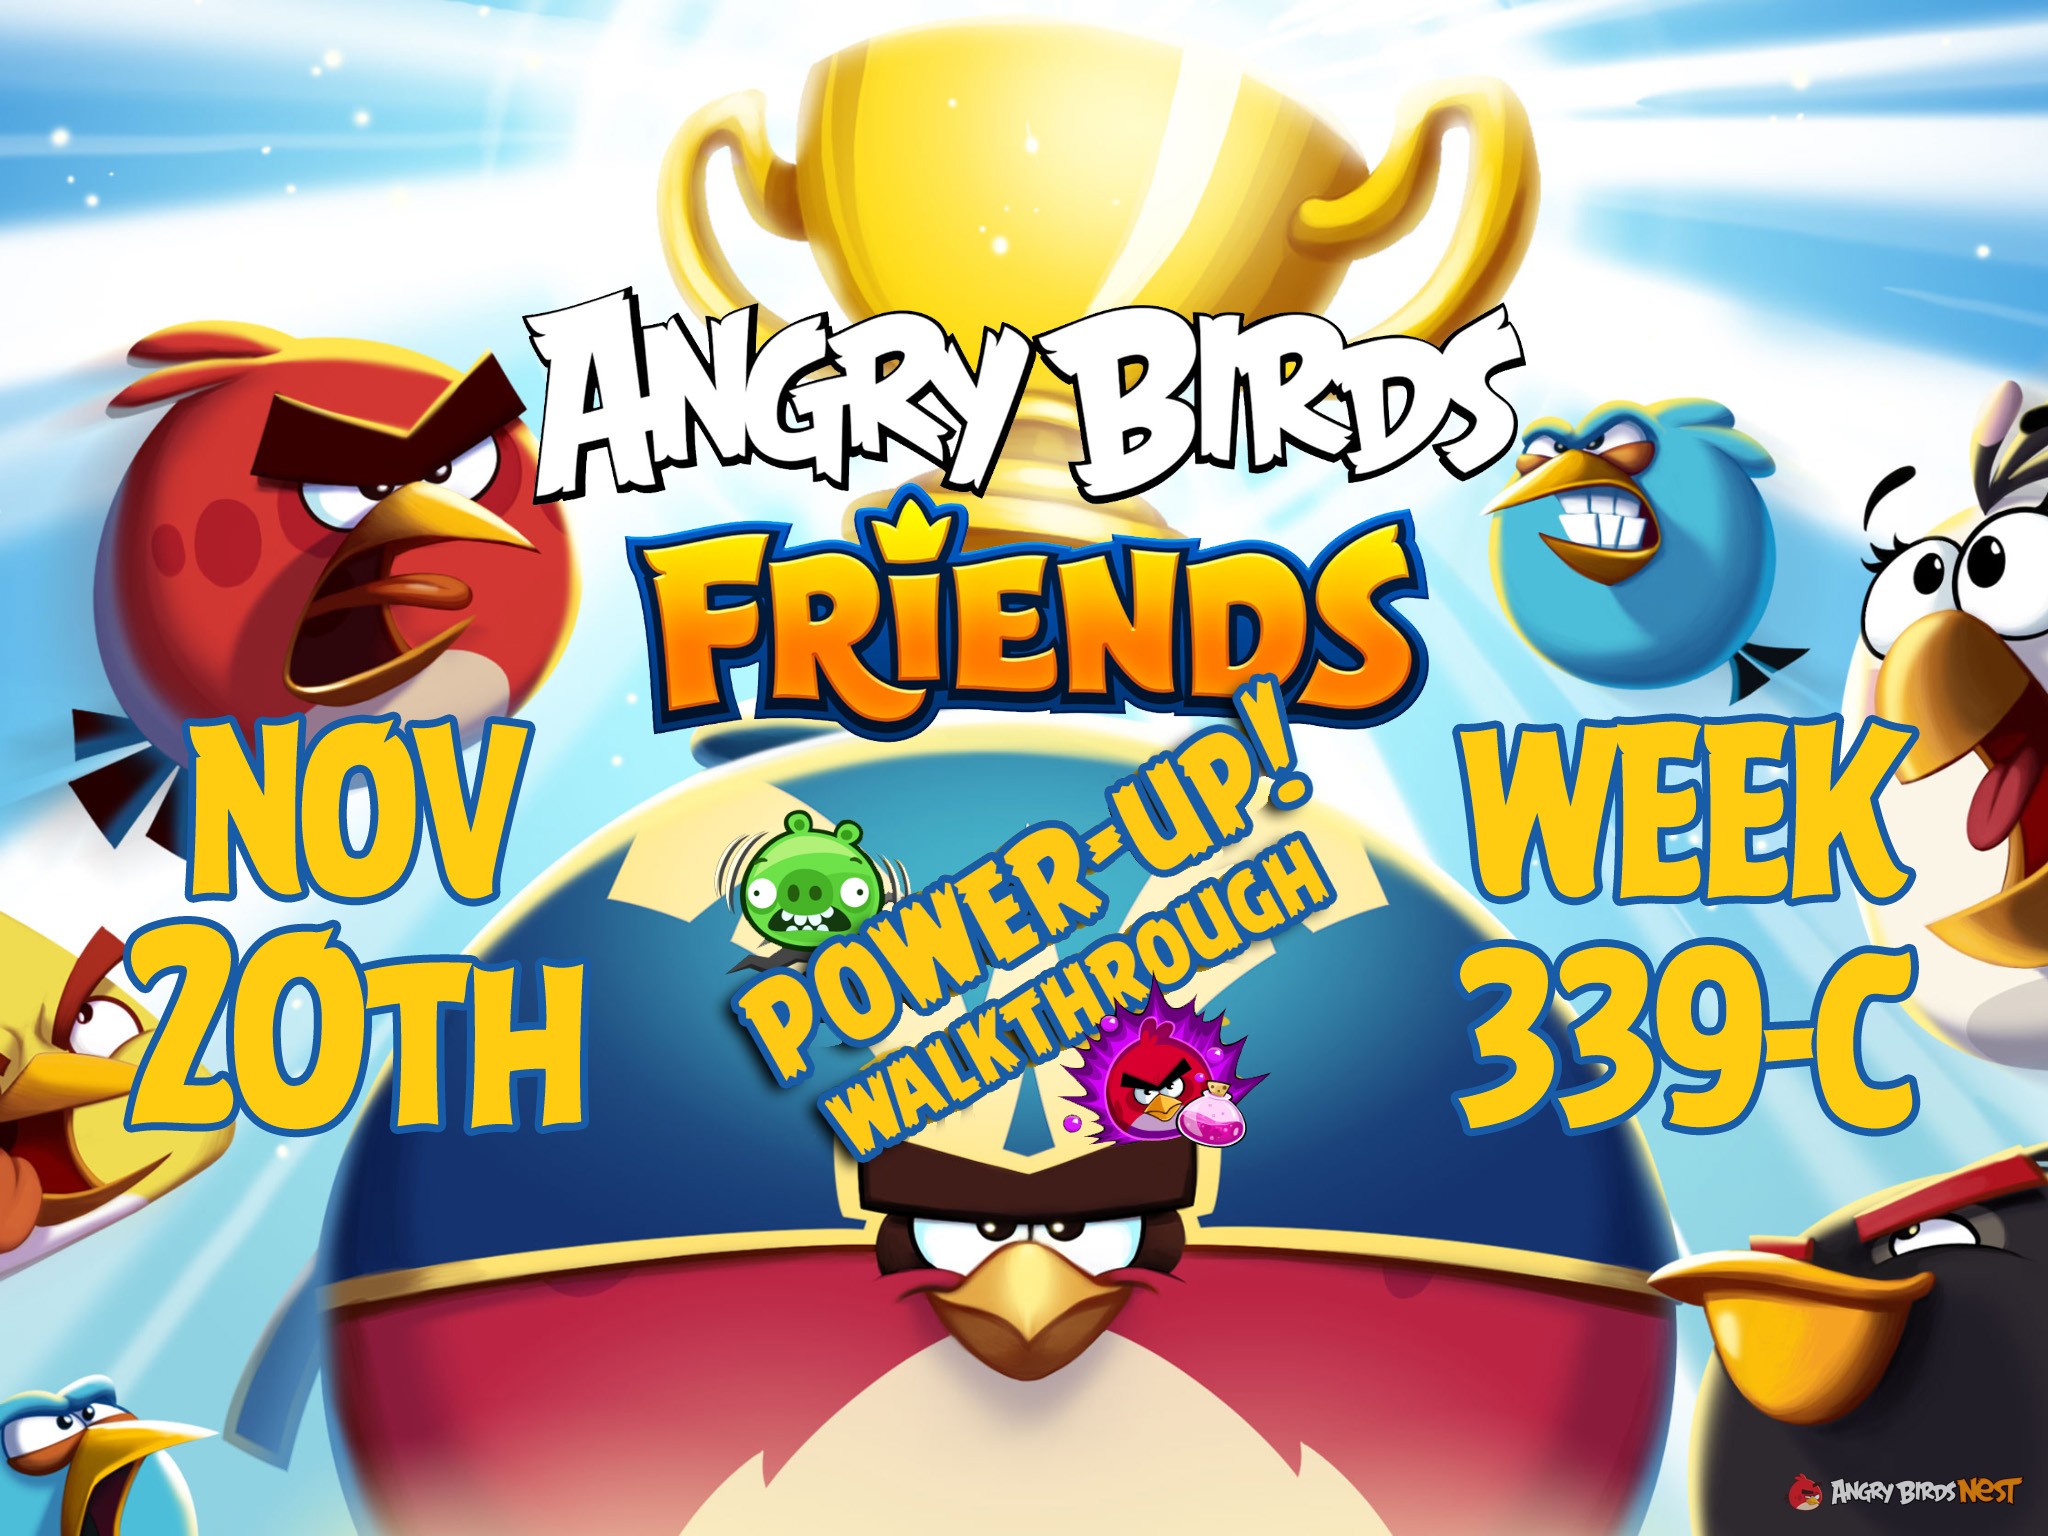 Angry-Birds-Friends-Tournament-Week-339-C-Feature-Image-PU